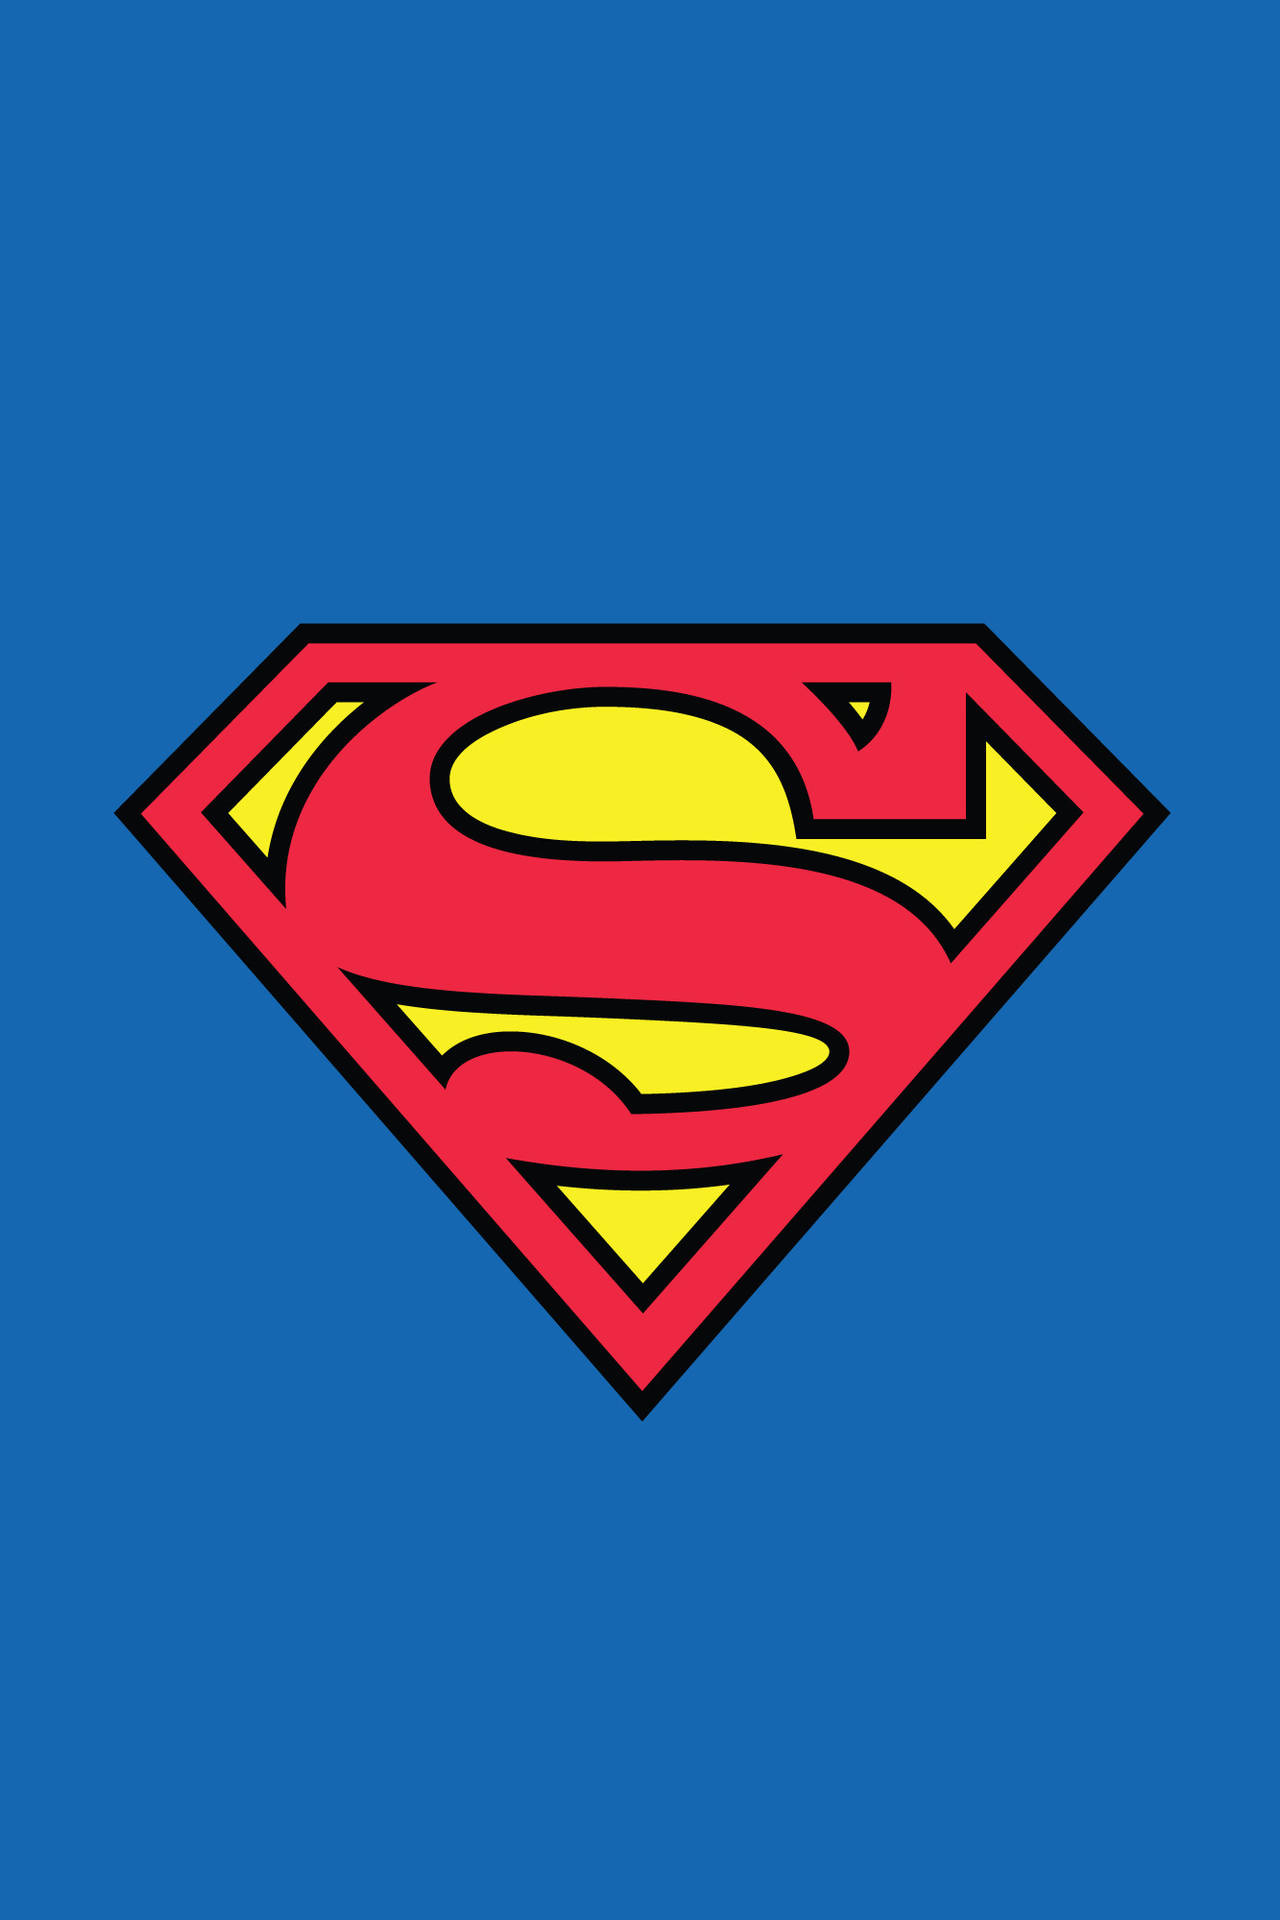 Top 999 Superman Wallpaper Full HD 4KFree to Use